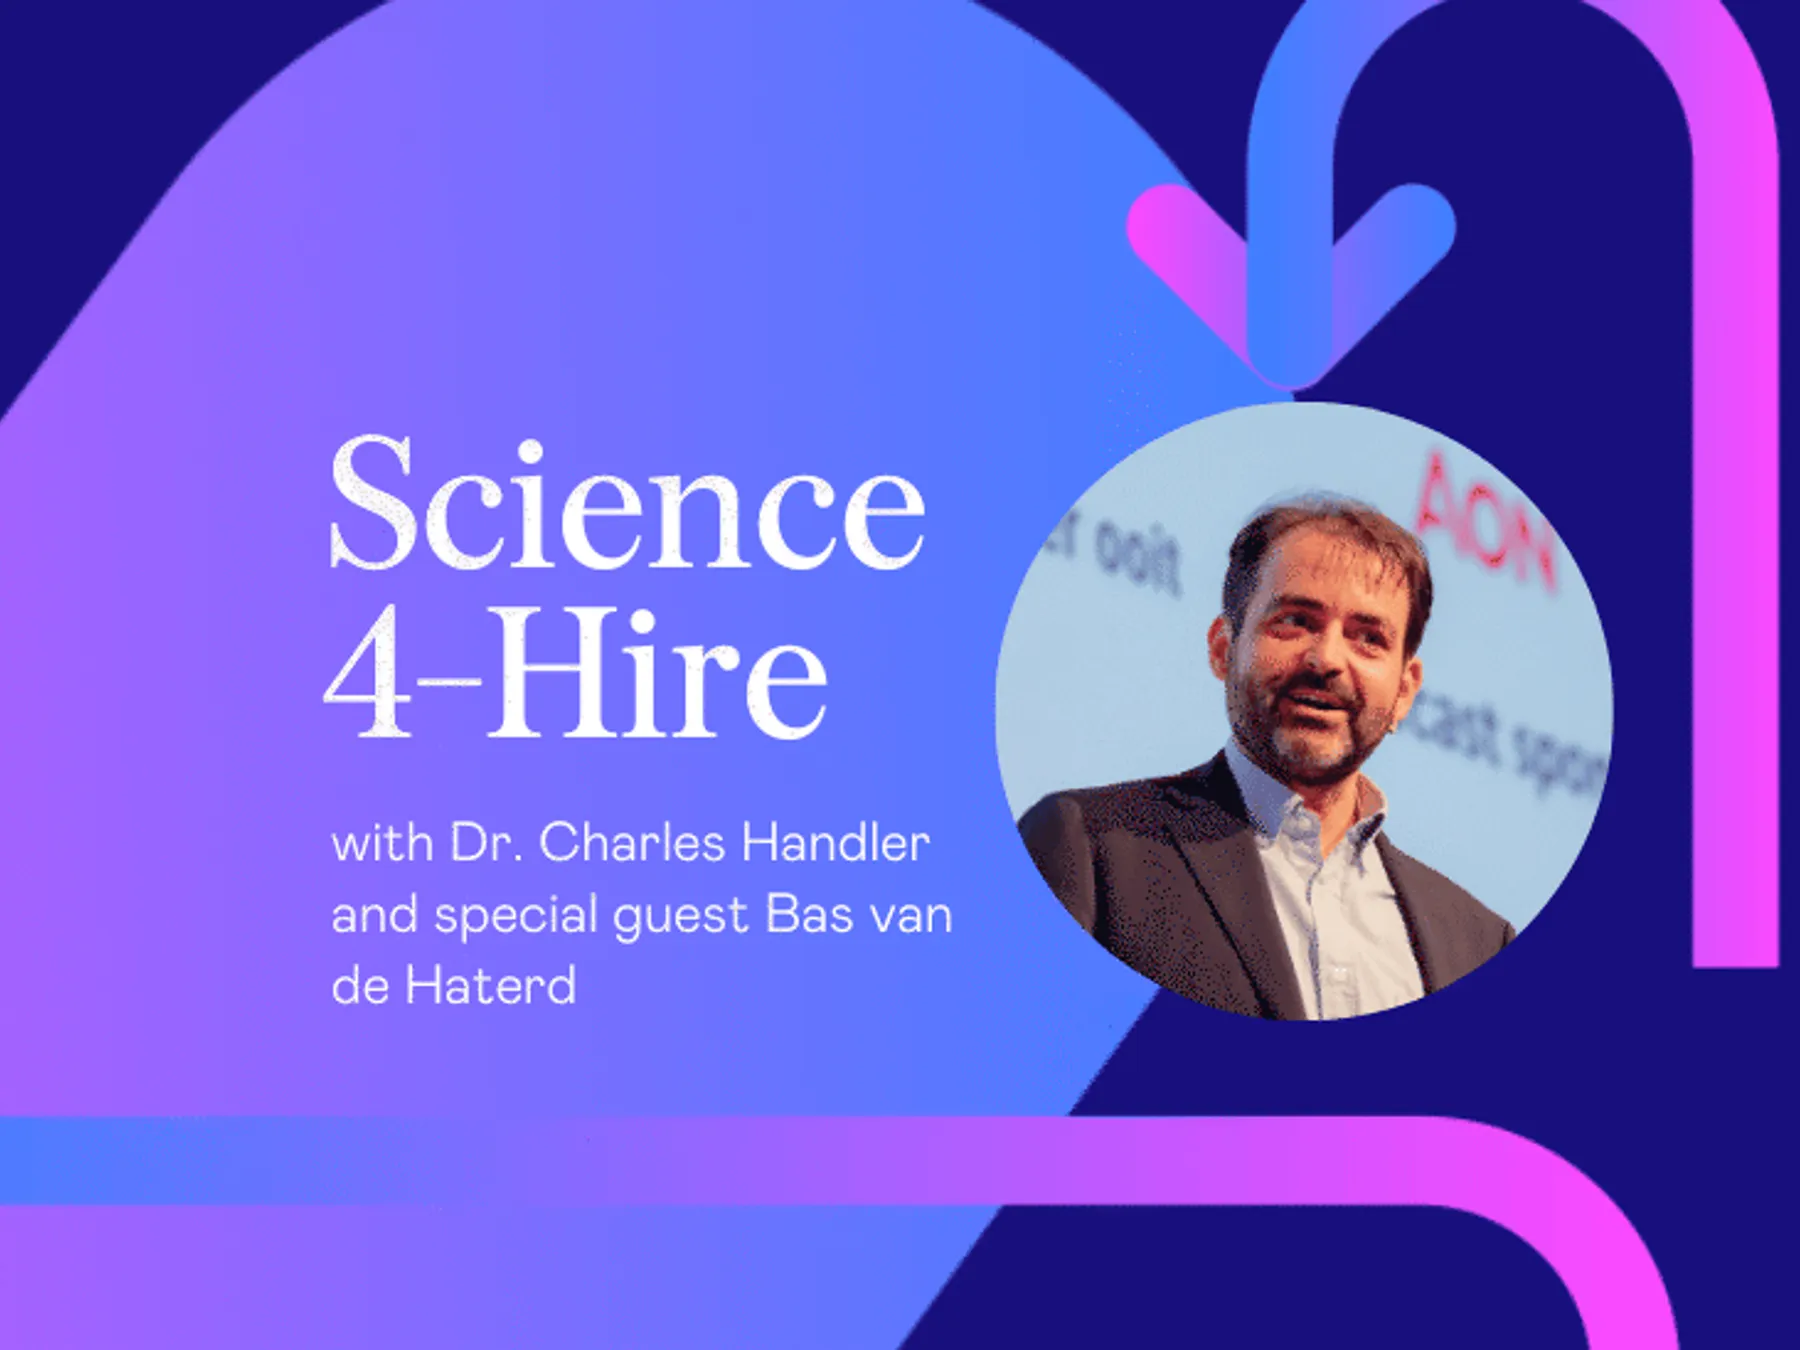 Science 4 Hire